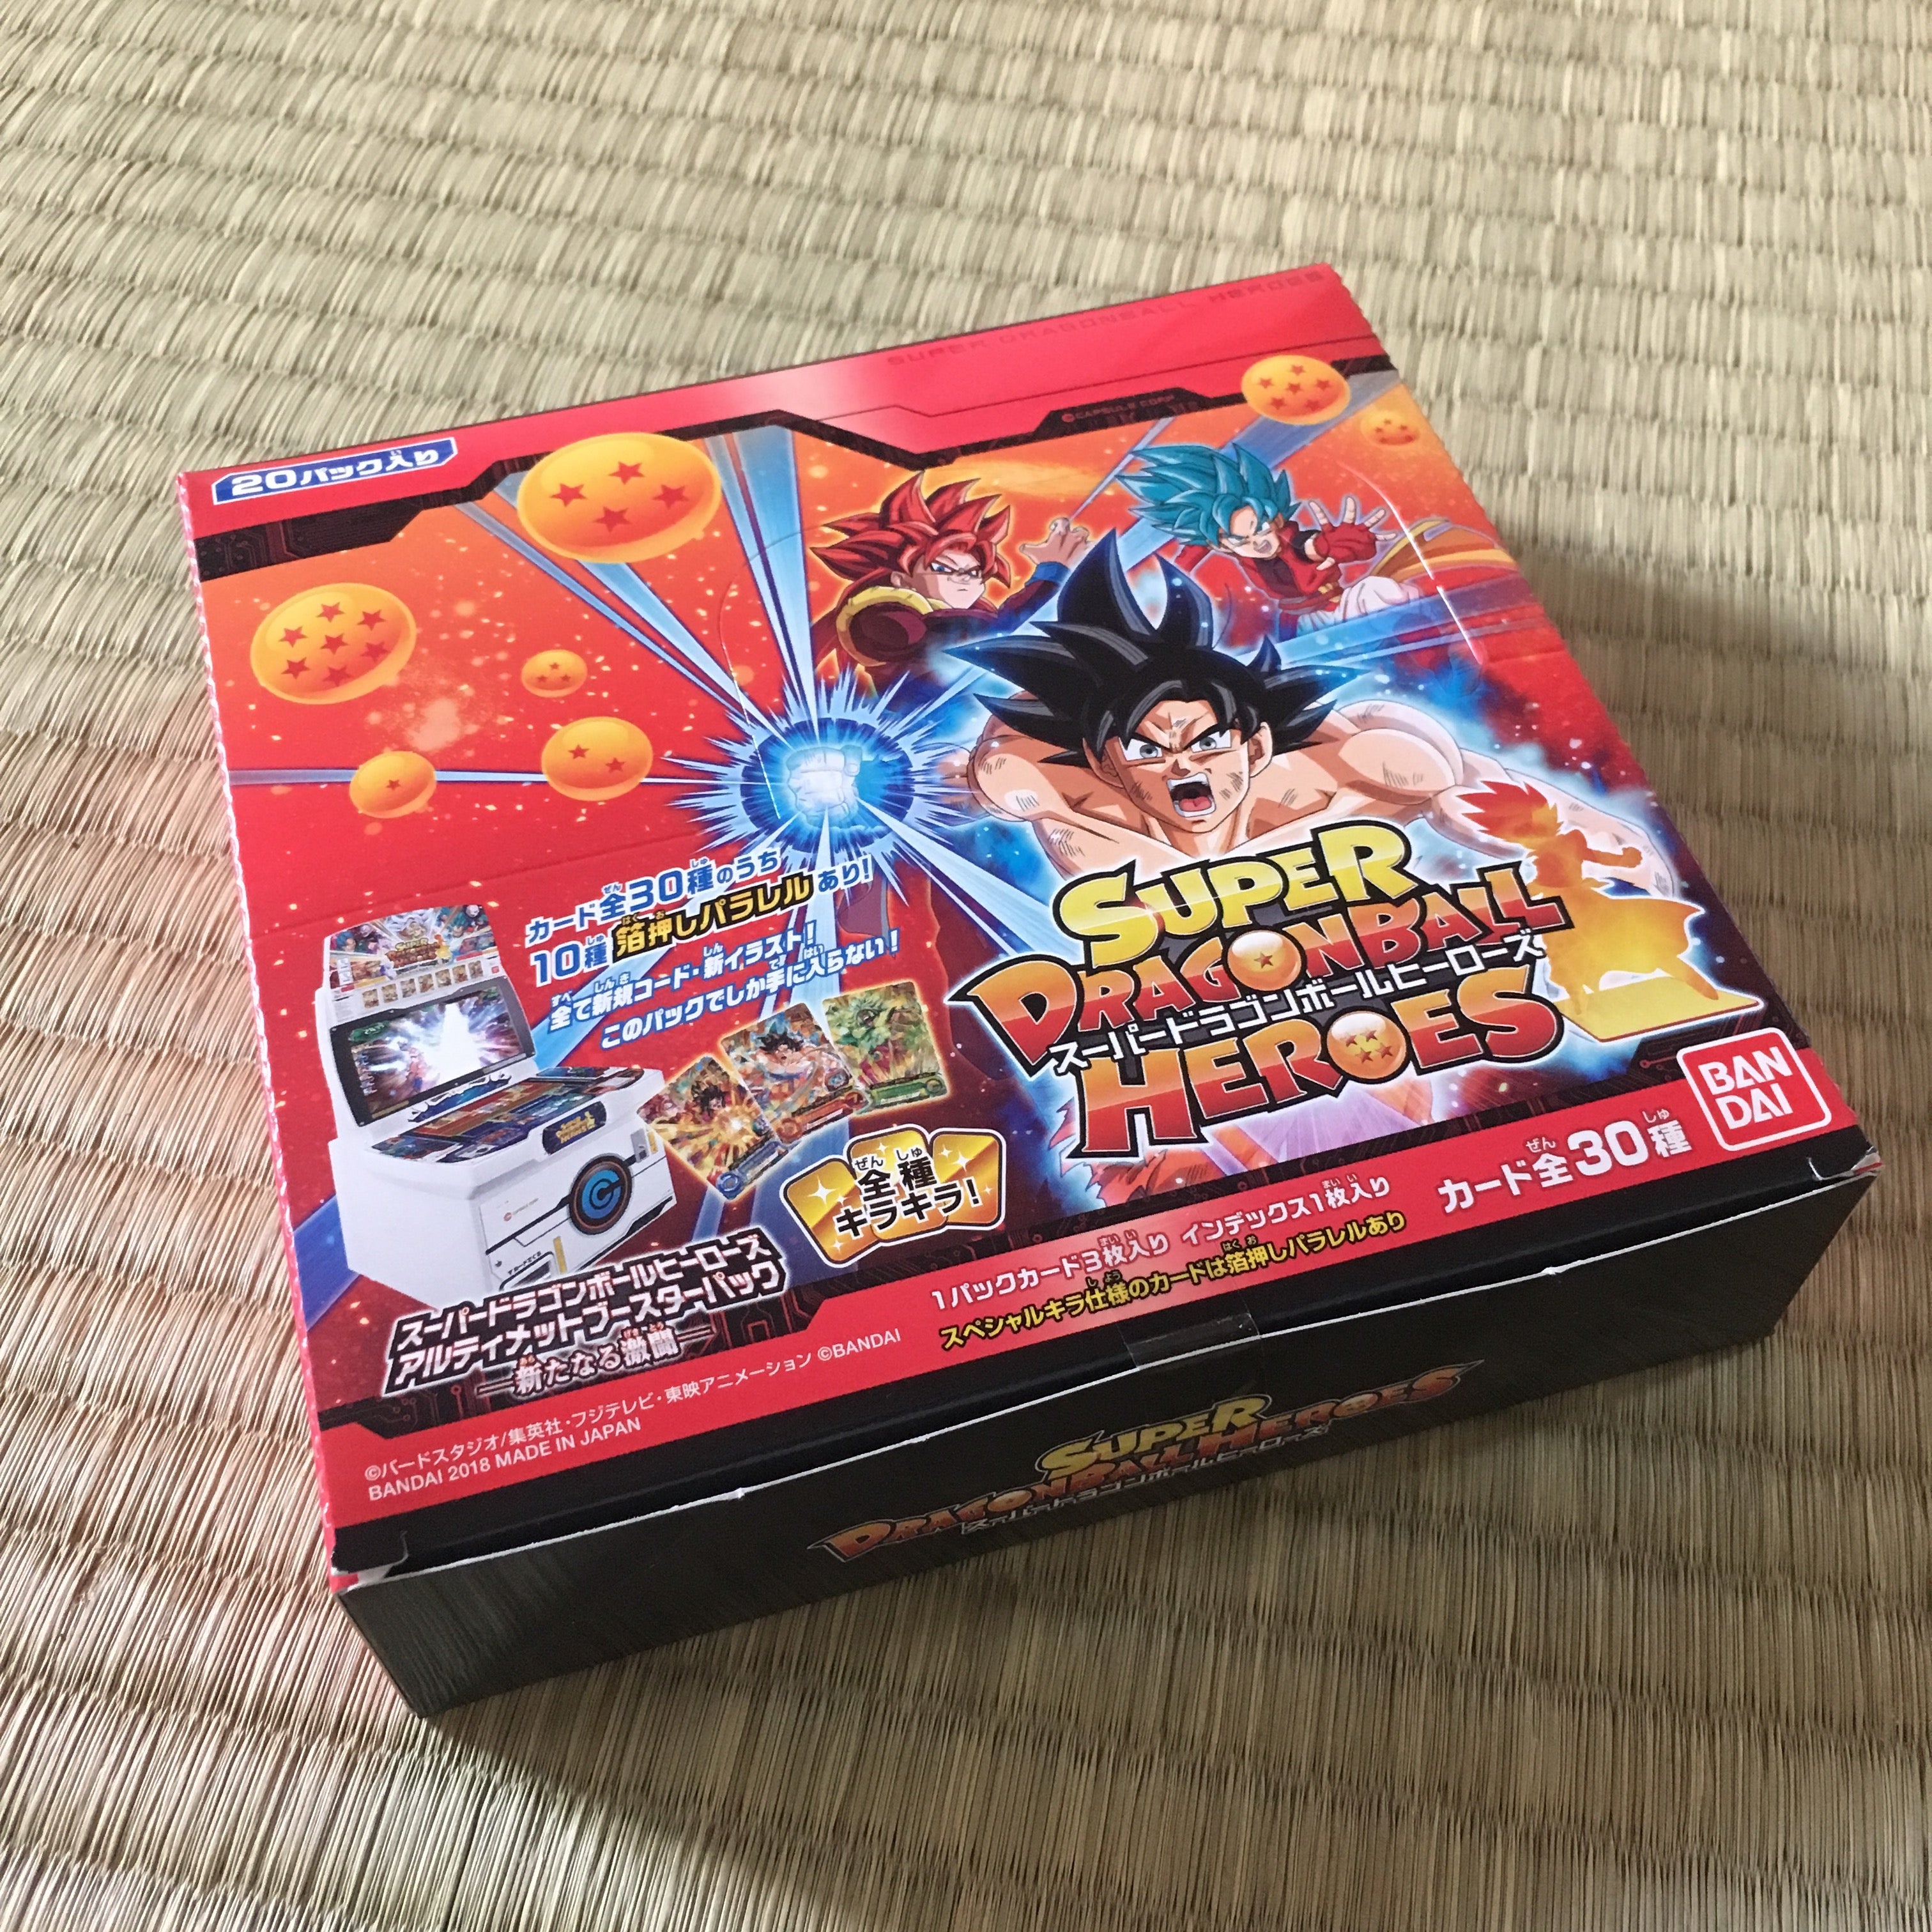 SUPER DRAGON BALL HEROES ULTIMATE BOOSTER PACK PUMS3 voll